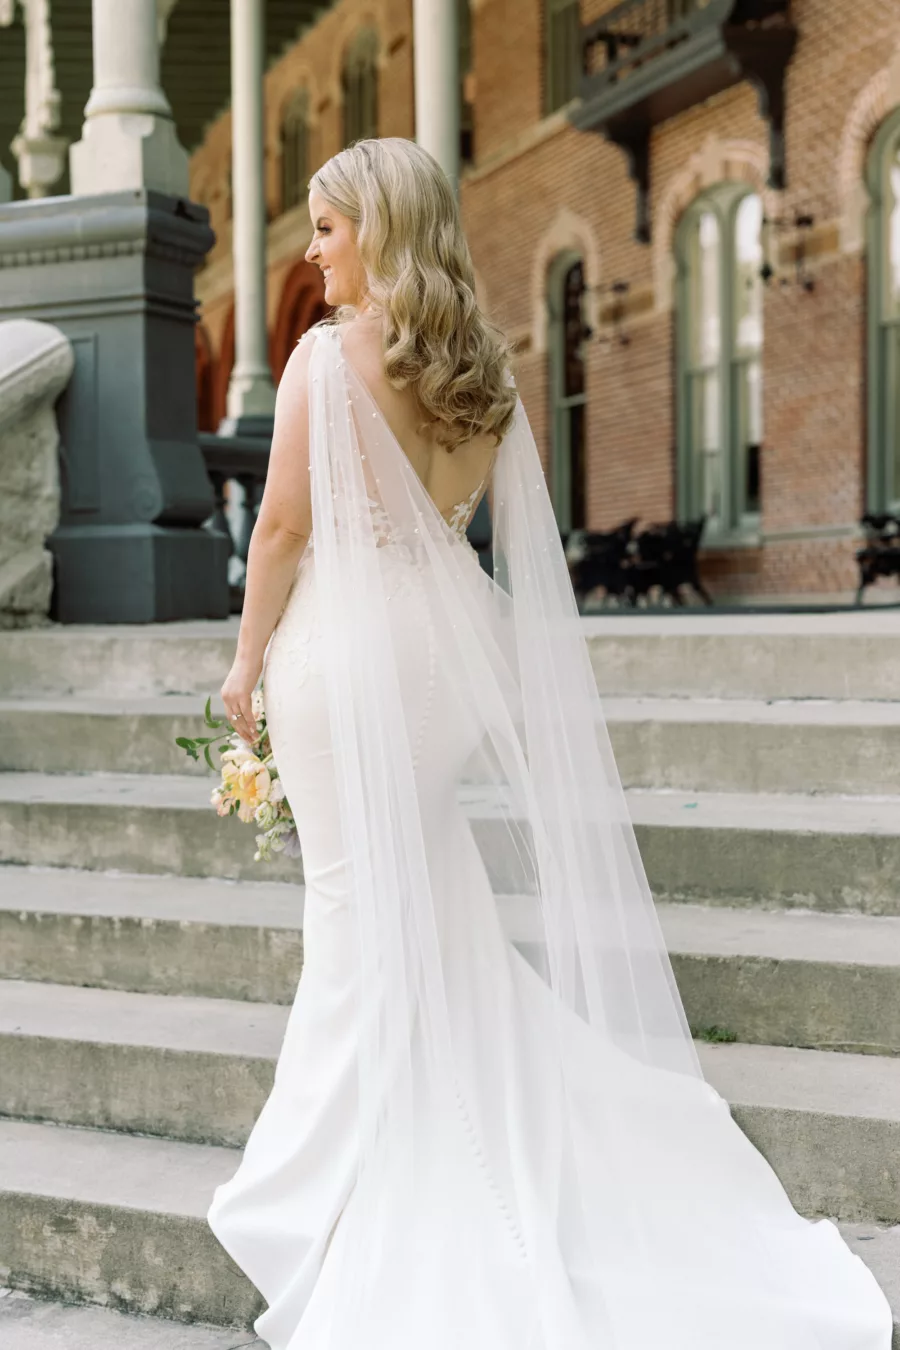 White Lace Fit and Flare Wedding Dress with Illusion Plunging Neckline and Open Back Inspiration | Veil Cape Ideas | Boutique Truly Forever Bridal Tampa | Tampa Bay Photographer Dewitt For Love Photography